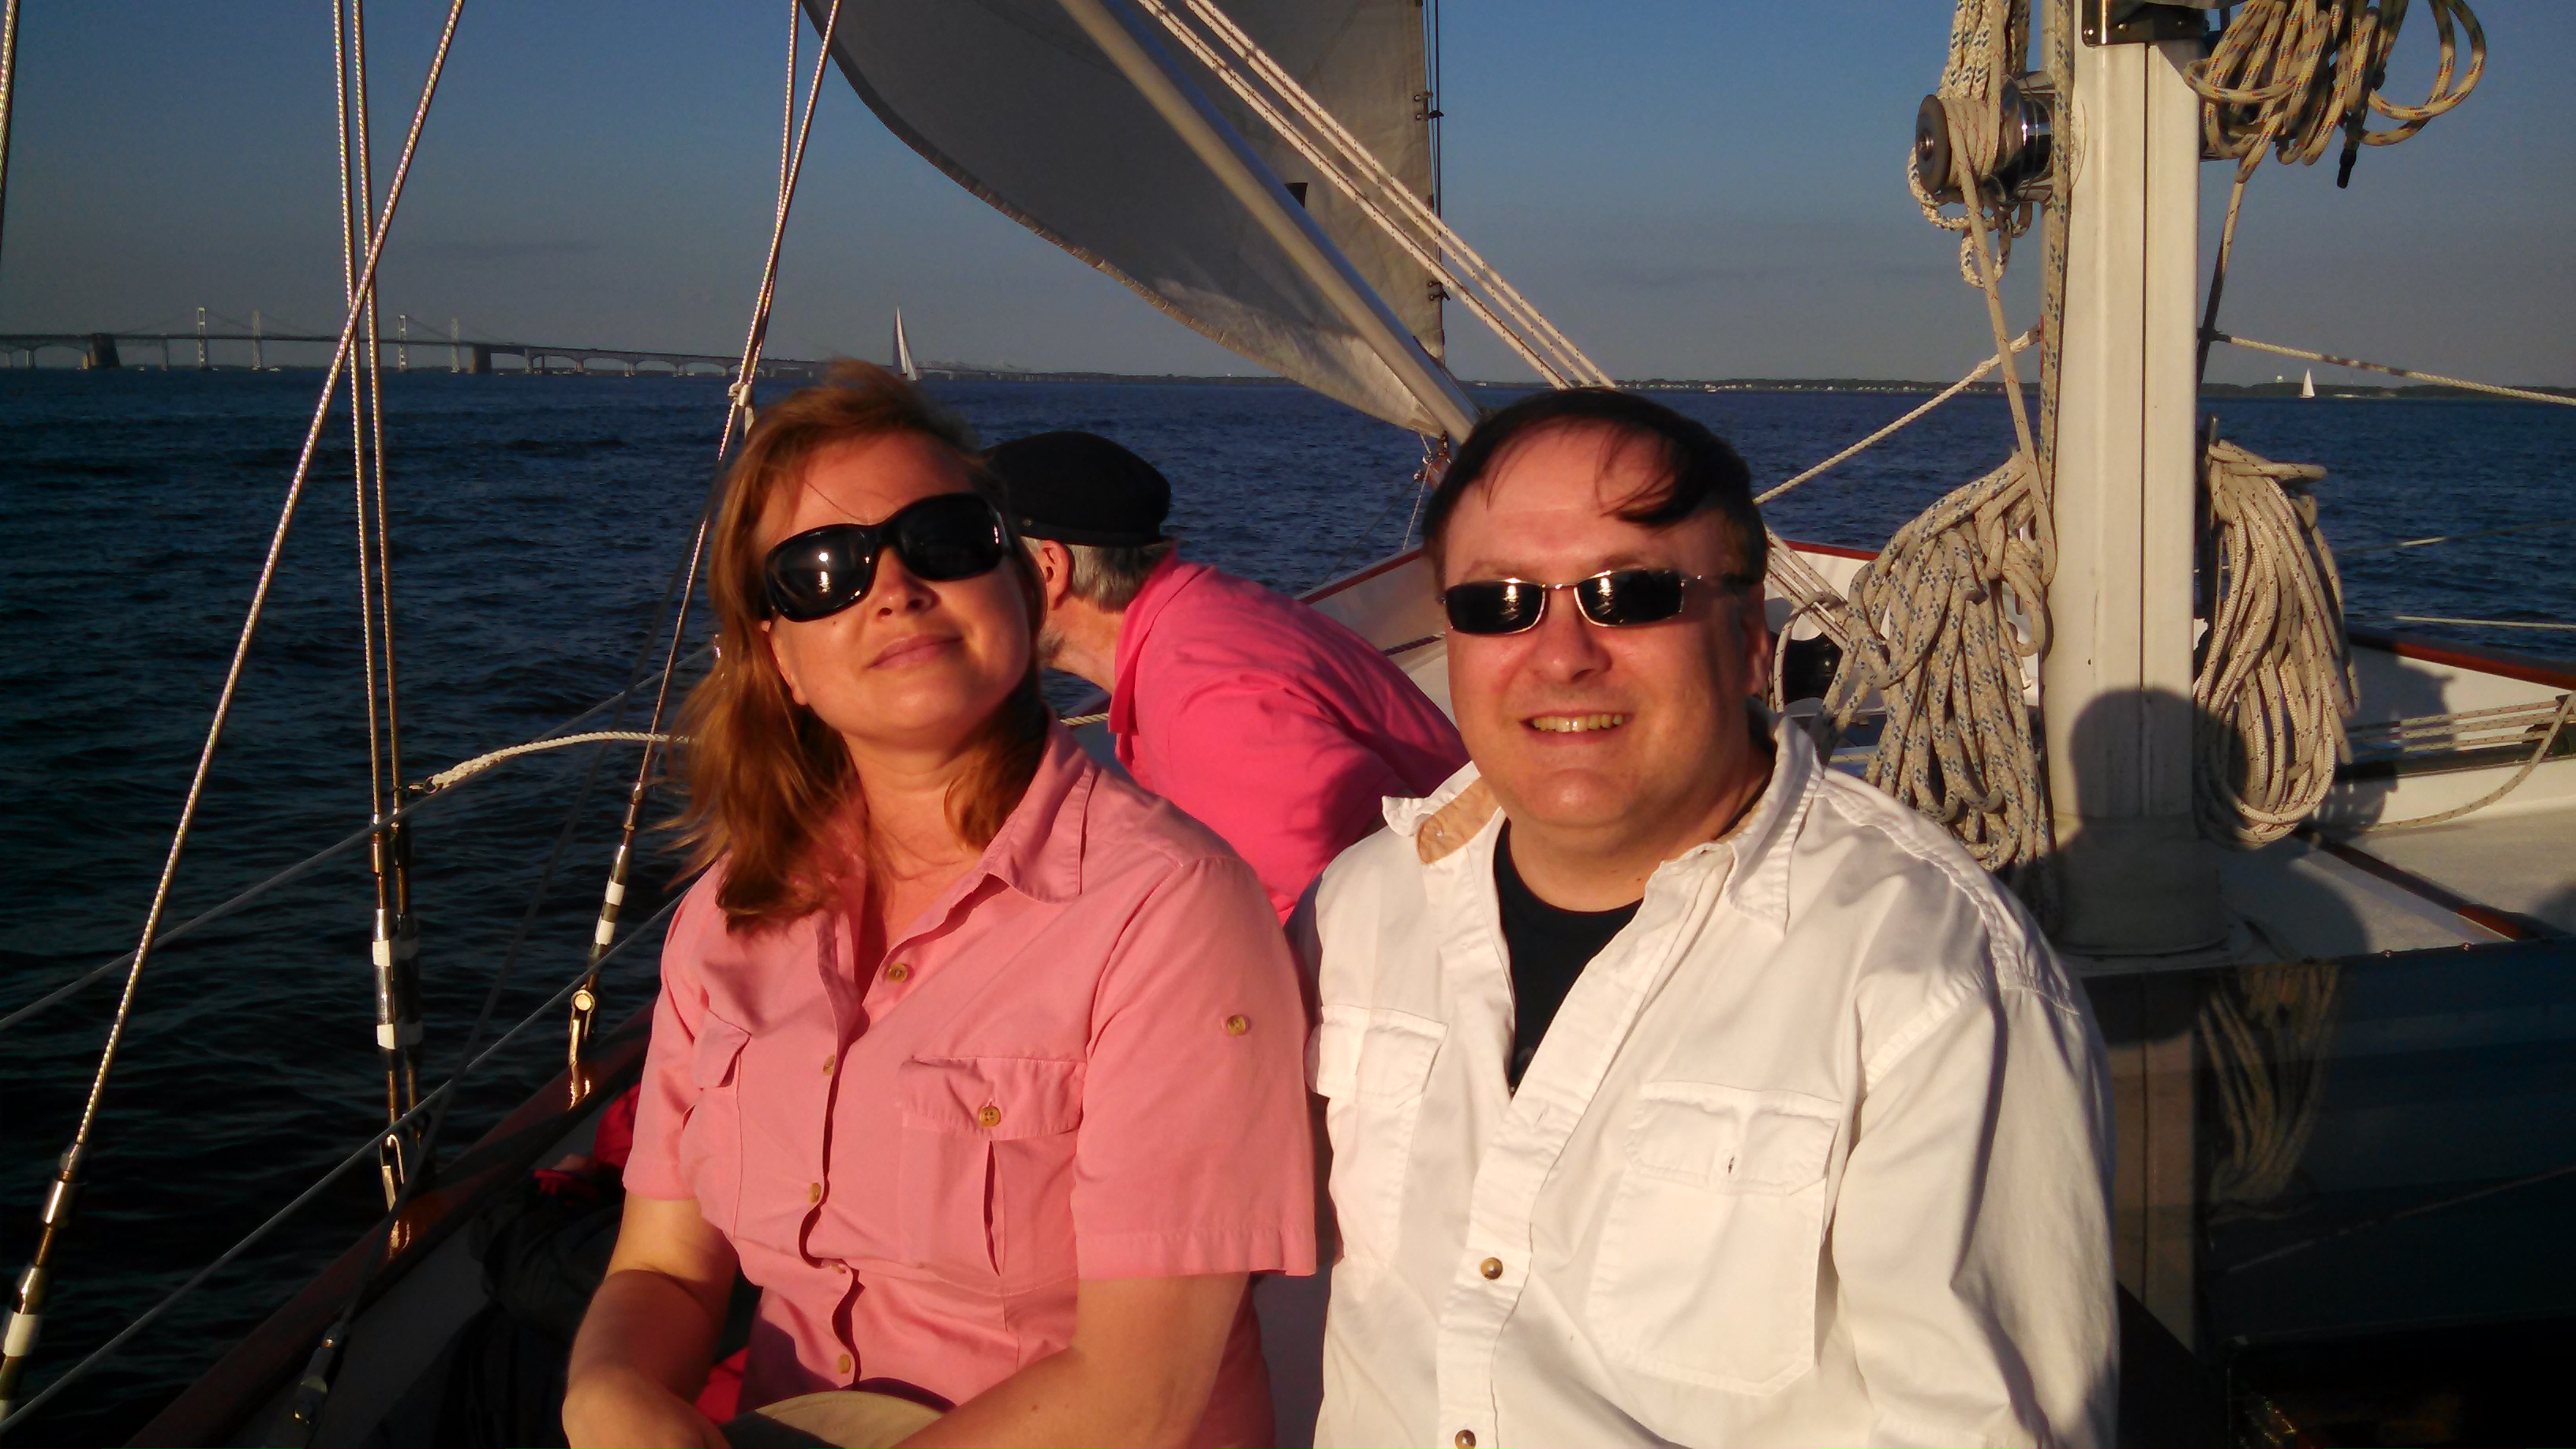 Happy guests aboard the schooner sailing on a sunny day